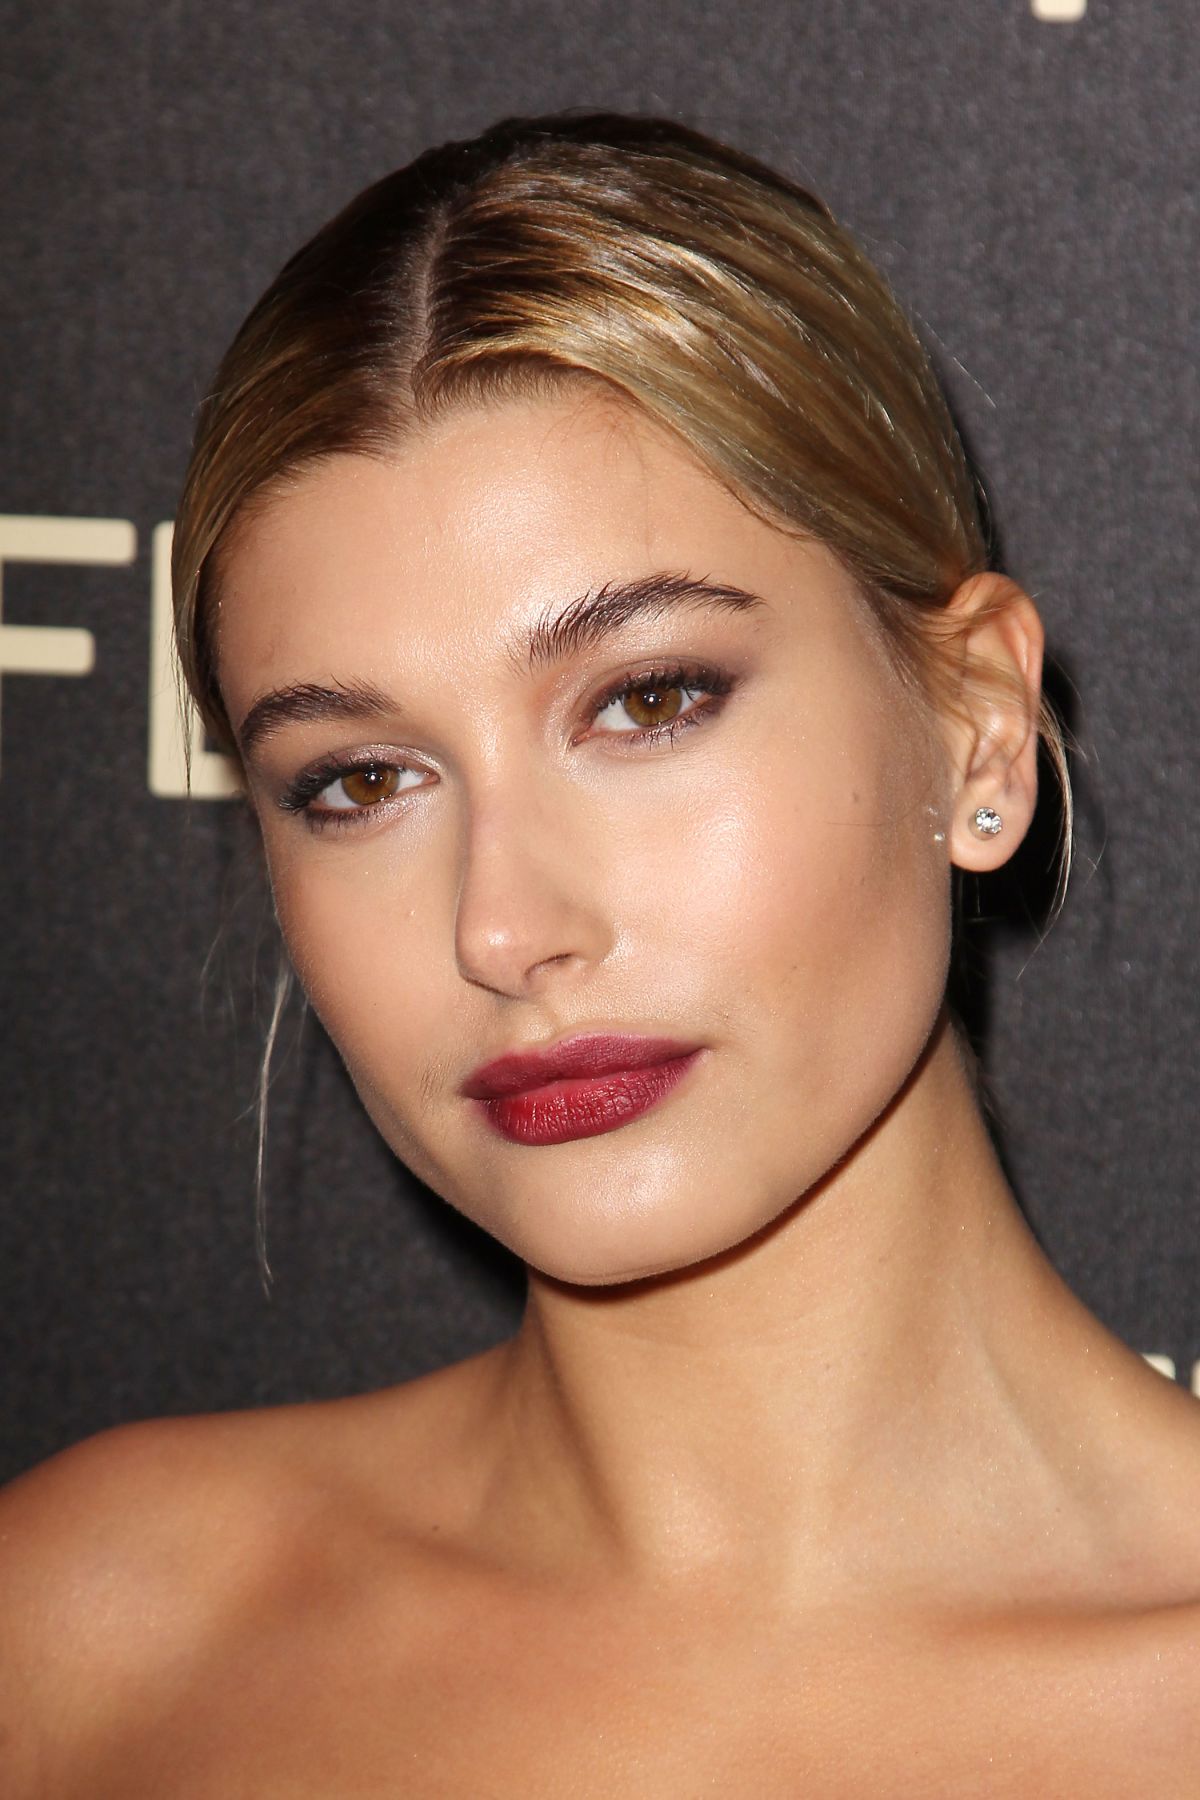 hailey-baldwin-at-fendi-new-york-flagship-boutique-party-at-mbfw-in-new-york_26.jpg